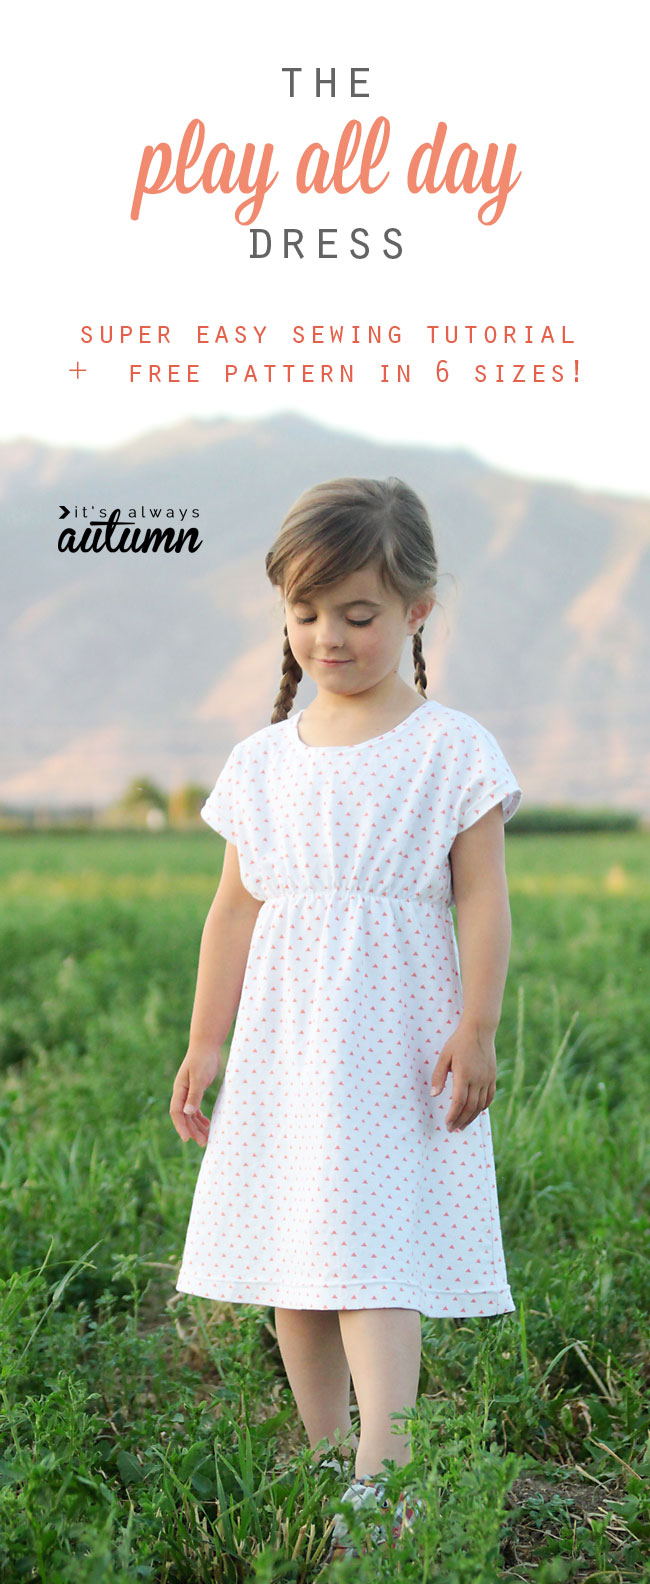 Simple Knit Dress Pattern The Play All Day Dress Free Girls Dress Pattern In 6 Sizes Its